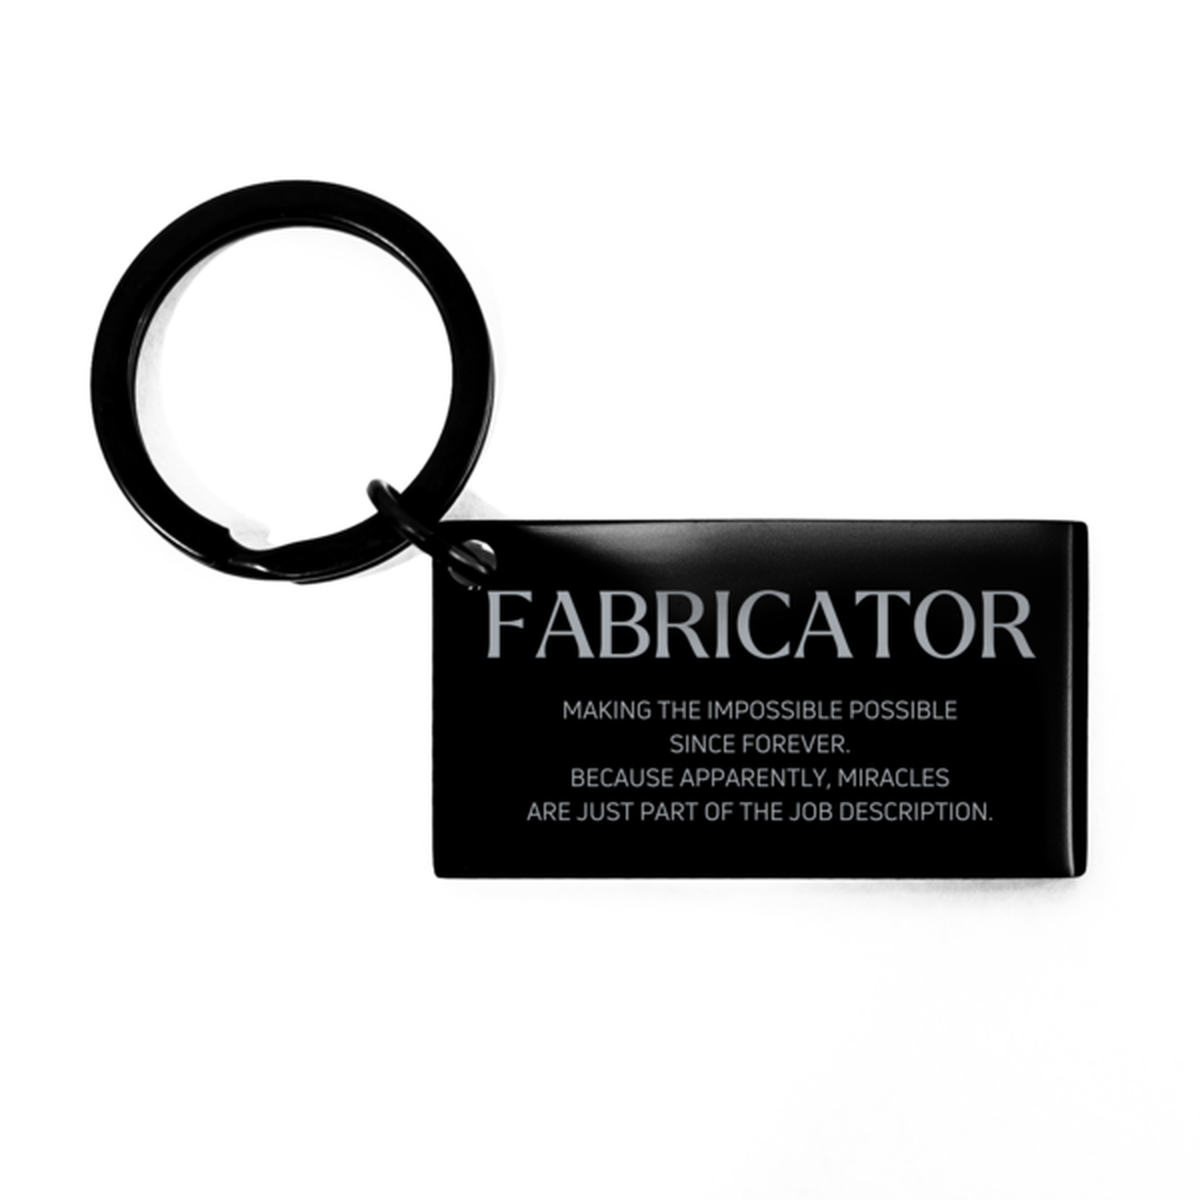 Funny Fabricator Gifts, Miracles are just part of the job description, Inspirational Birthday Keychain For Fabricator, Men, Women, Coworkers, Friends, Boss